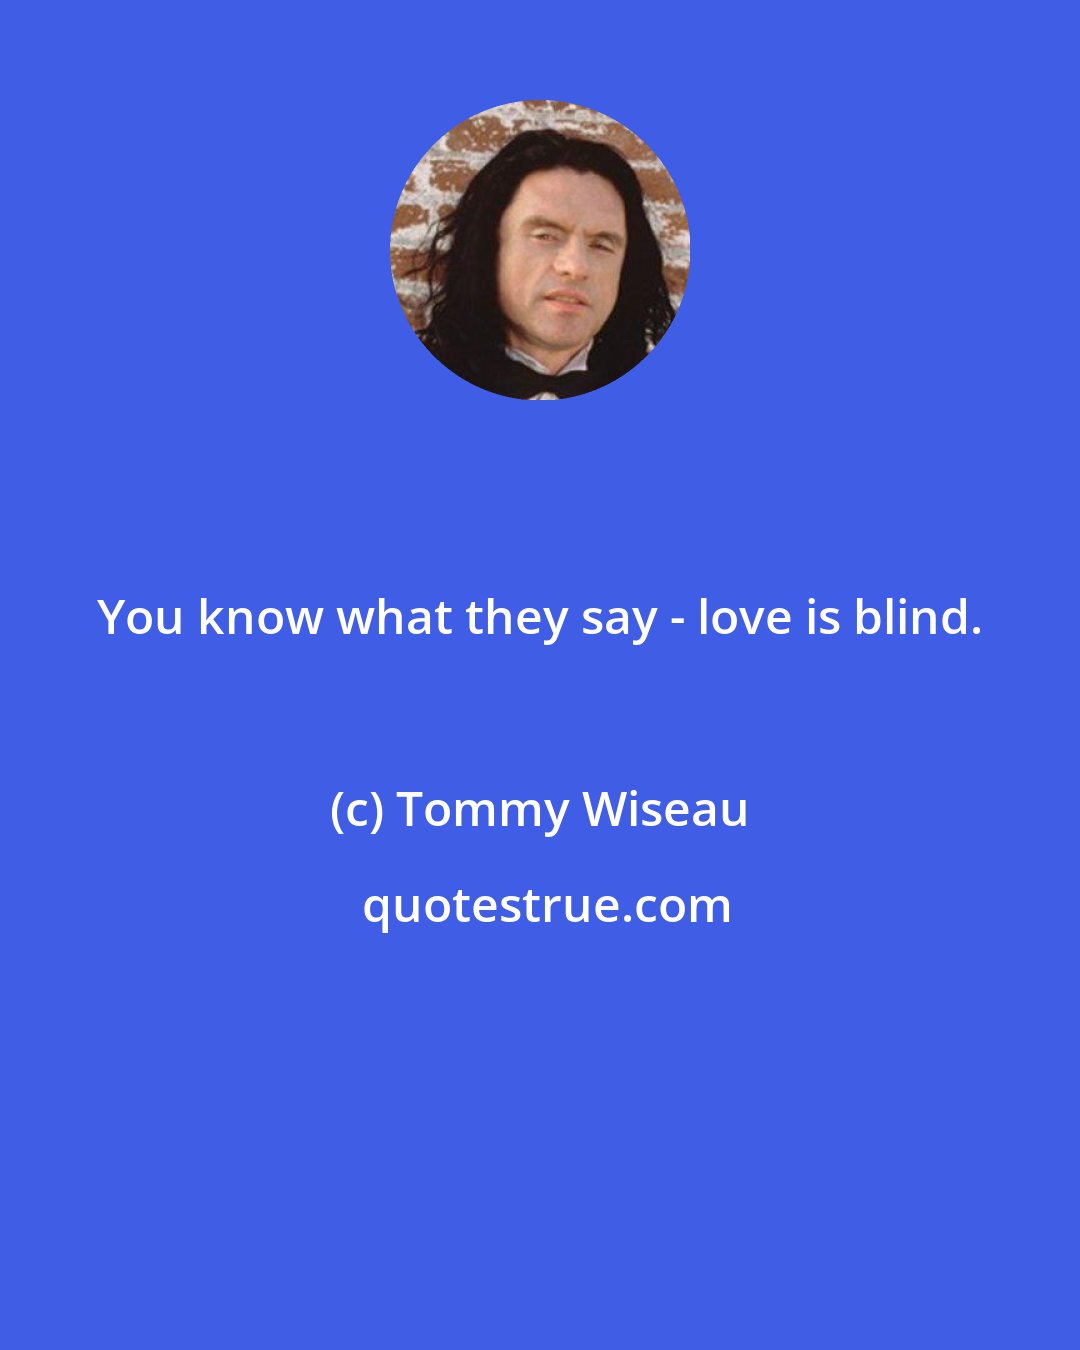 Tommy Wiseau: You know what they say - love is blind.